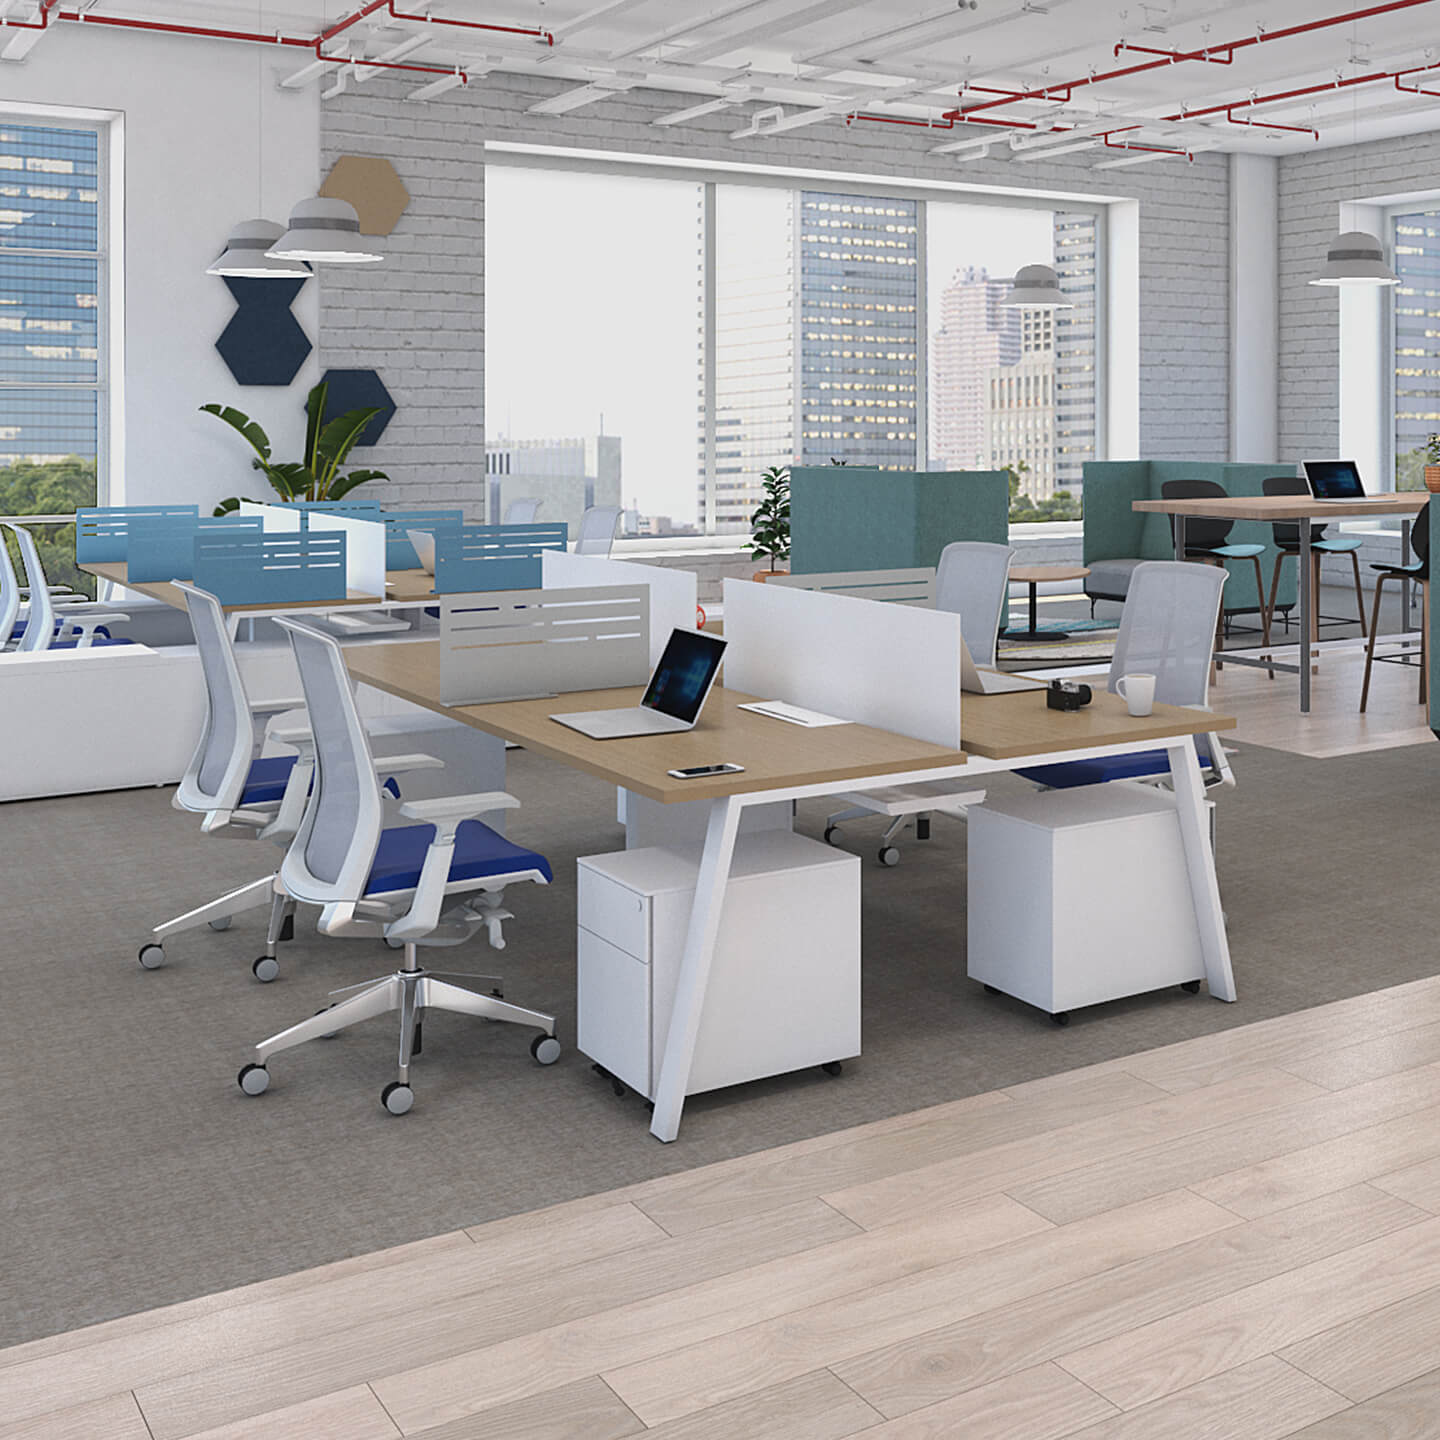 Haworth EZ Workspace partial divider in open office setting with multiple desks with glass windows